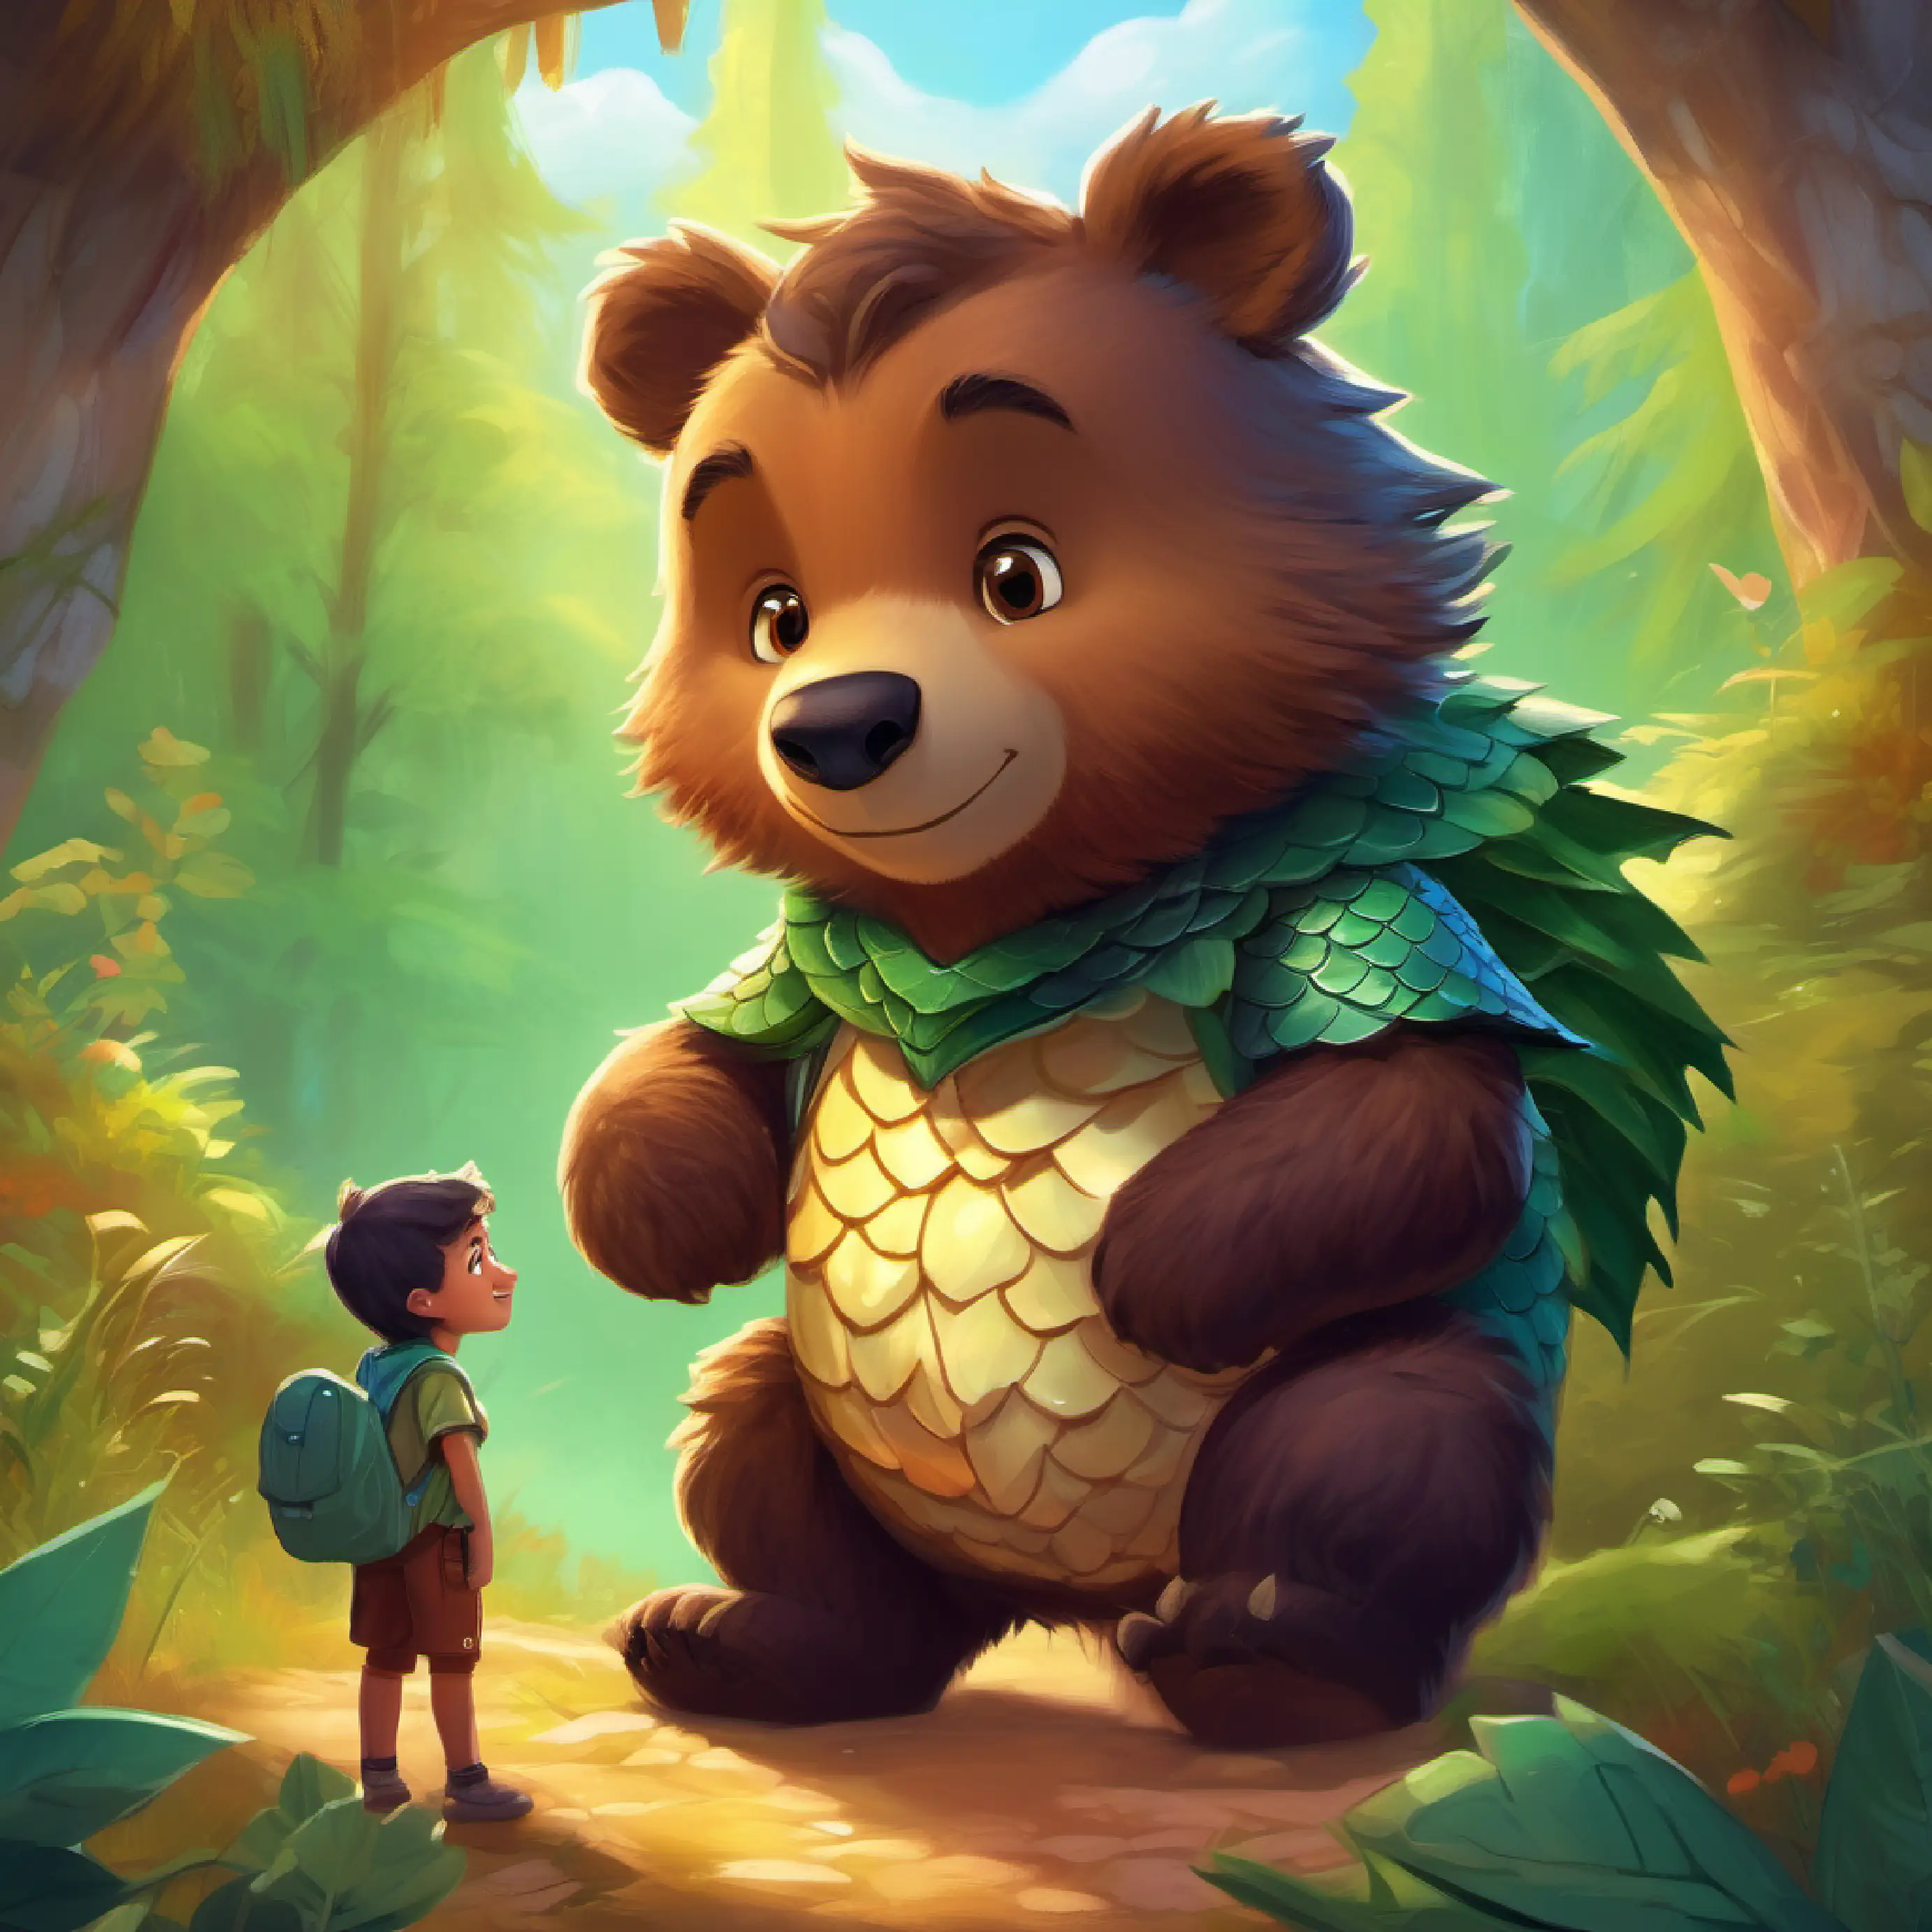 Little bear, fluffy, with curious brown eyes meets a friendly dragon named Small dragon, shiny scales, kind green eyes.